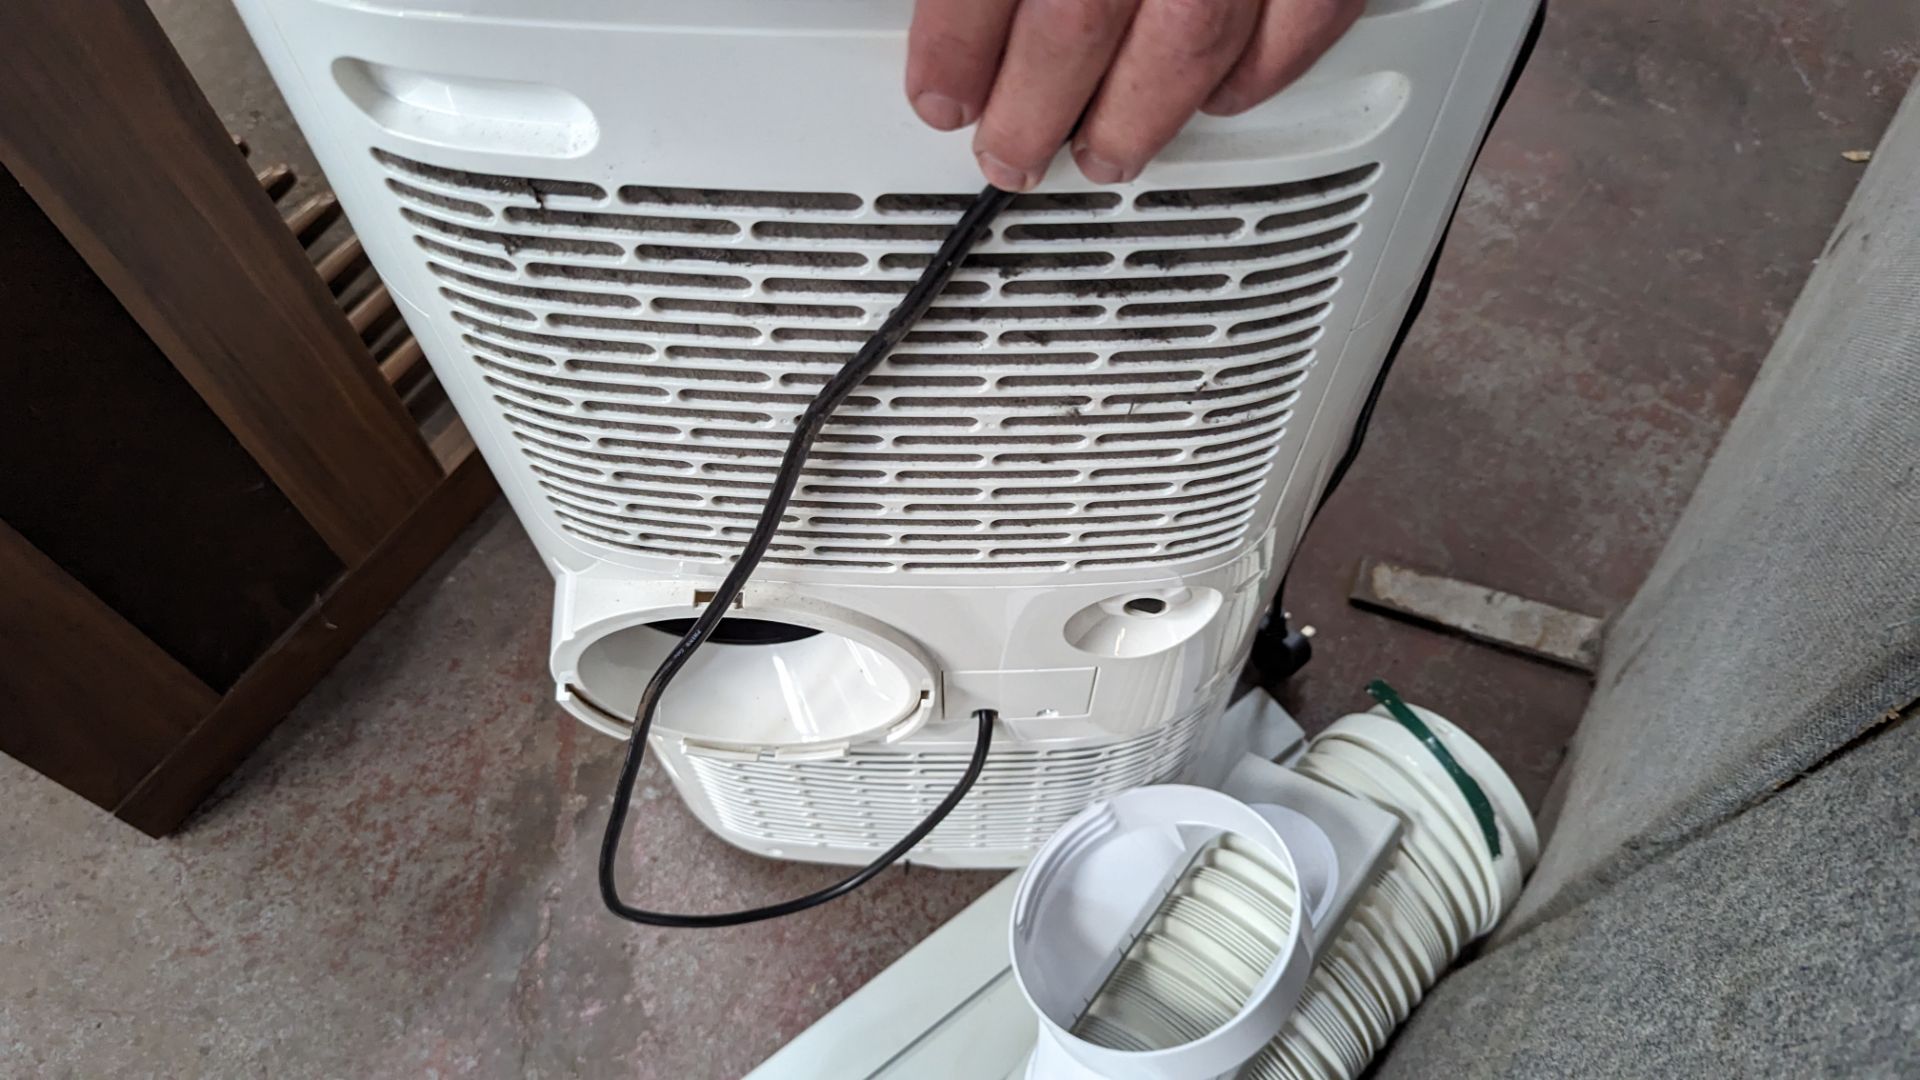 Good Home local air conditioning unit - Image 8 of 8